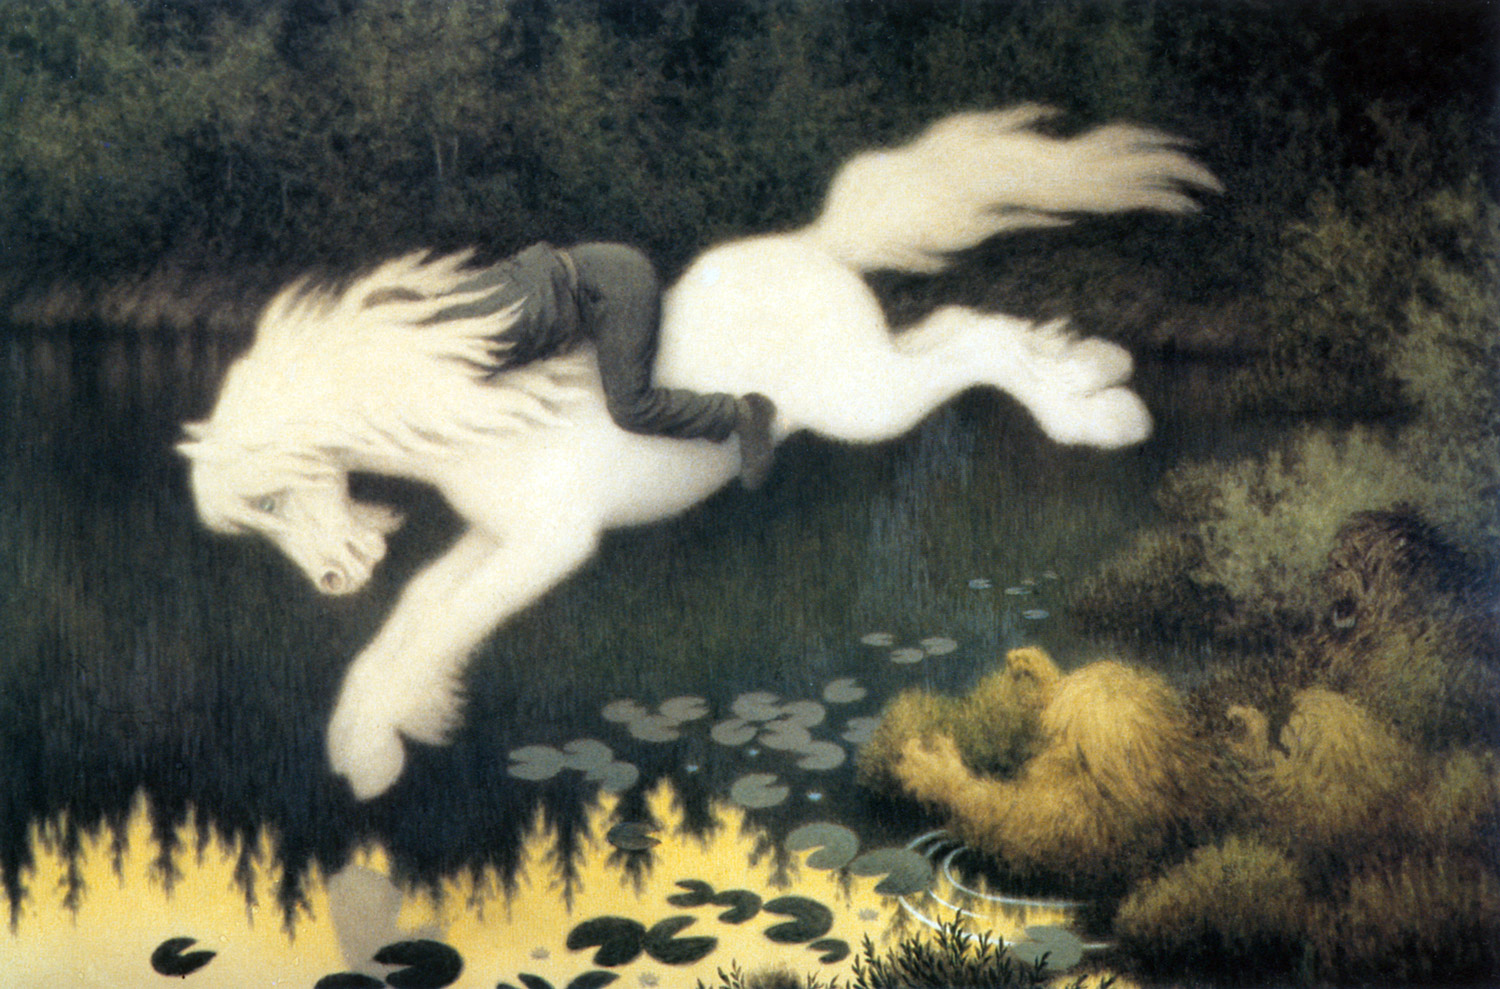 A boy on a horse galloping over a pond in a forest